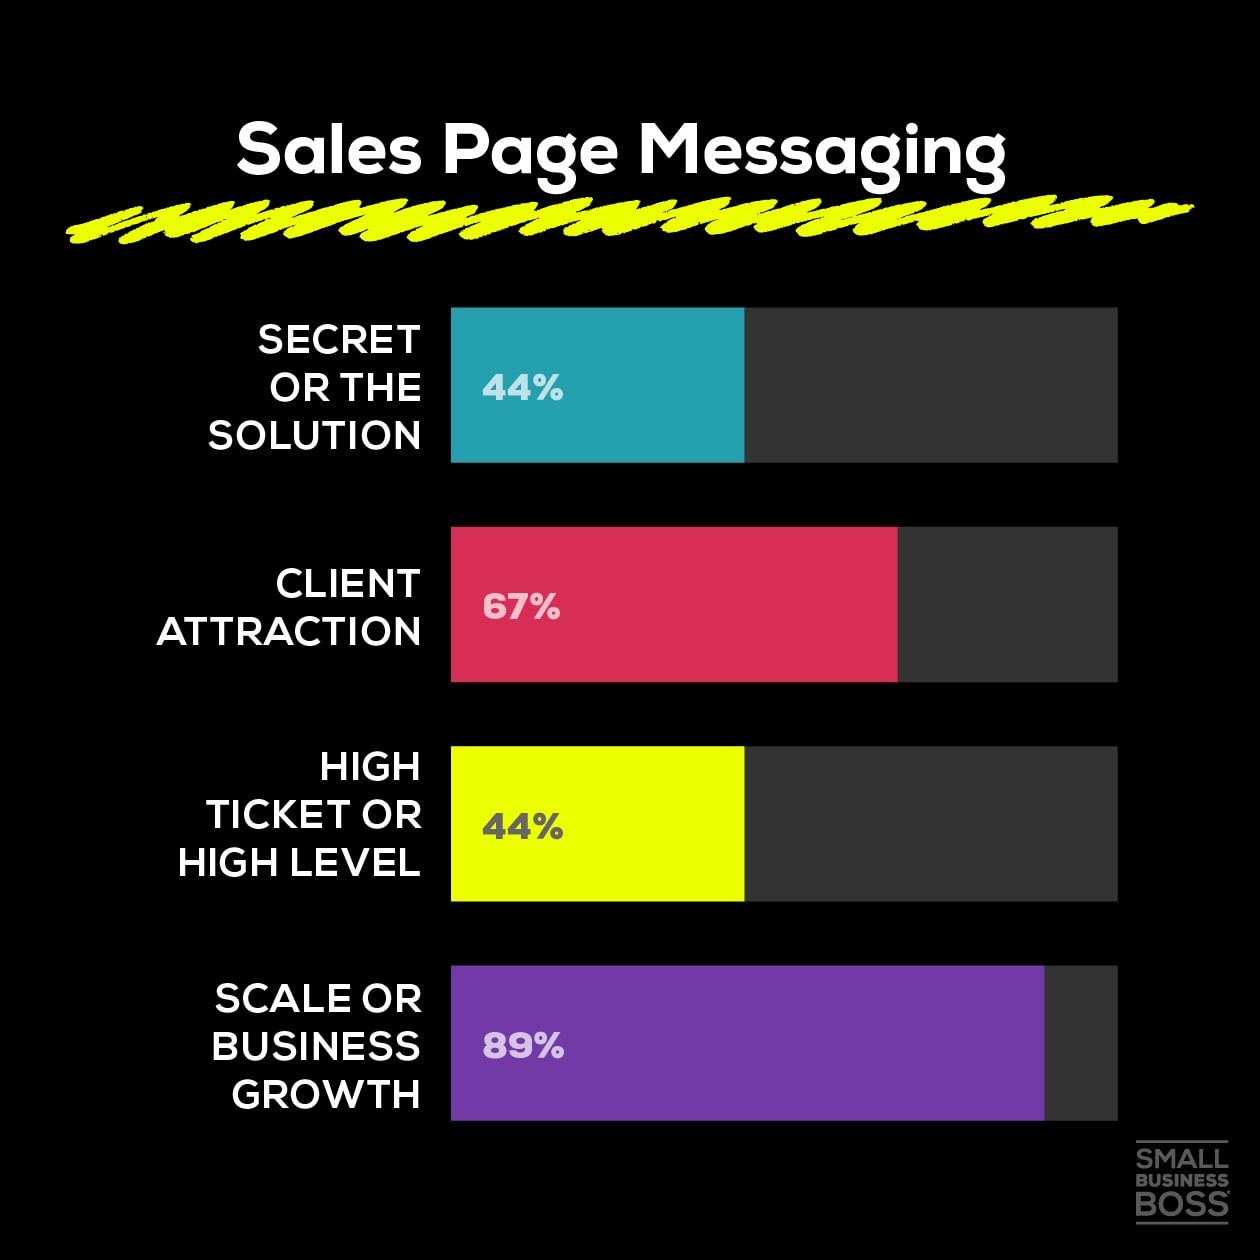 image of the sales page messaging percentages